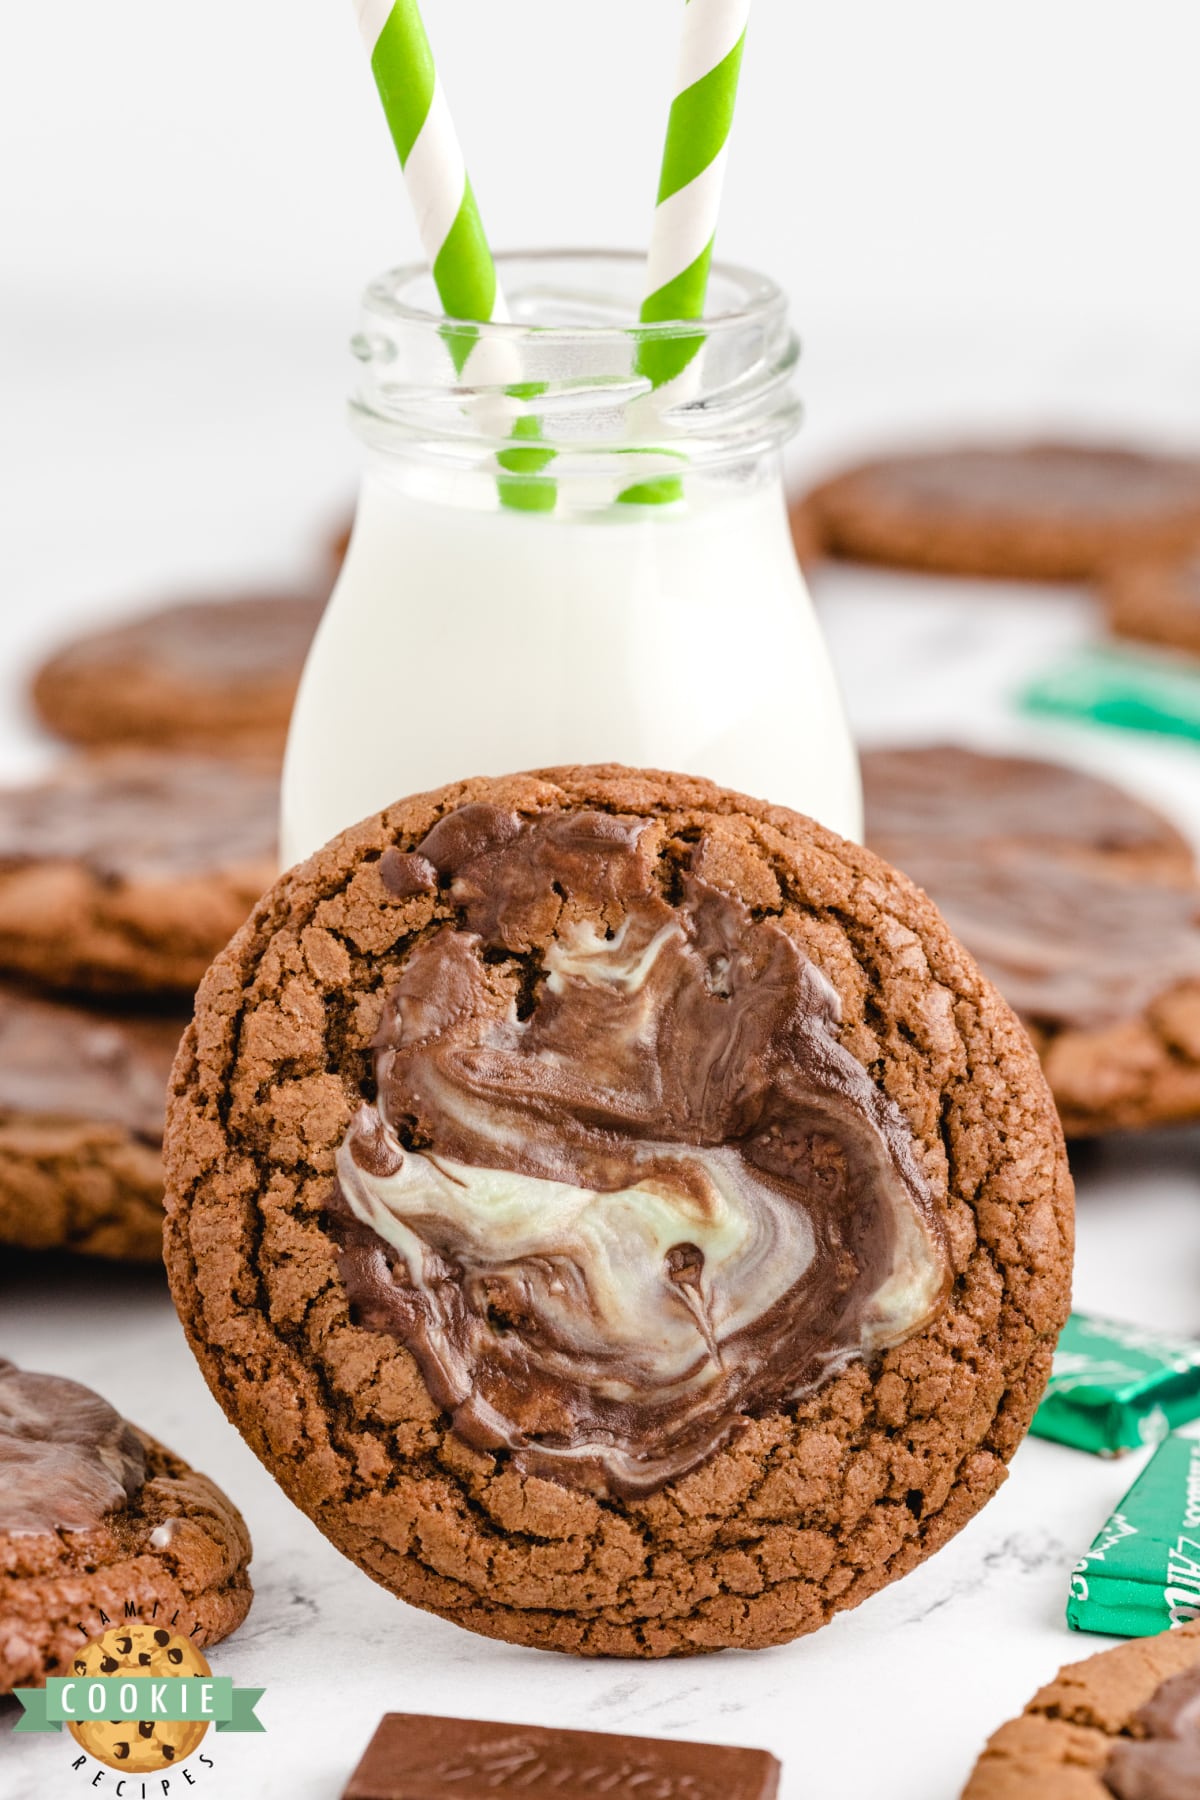 Mint chocolate cookie with a glass of milk